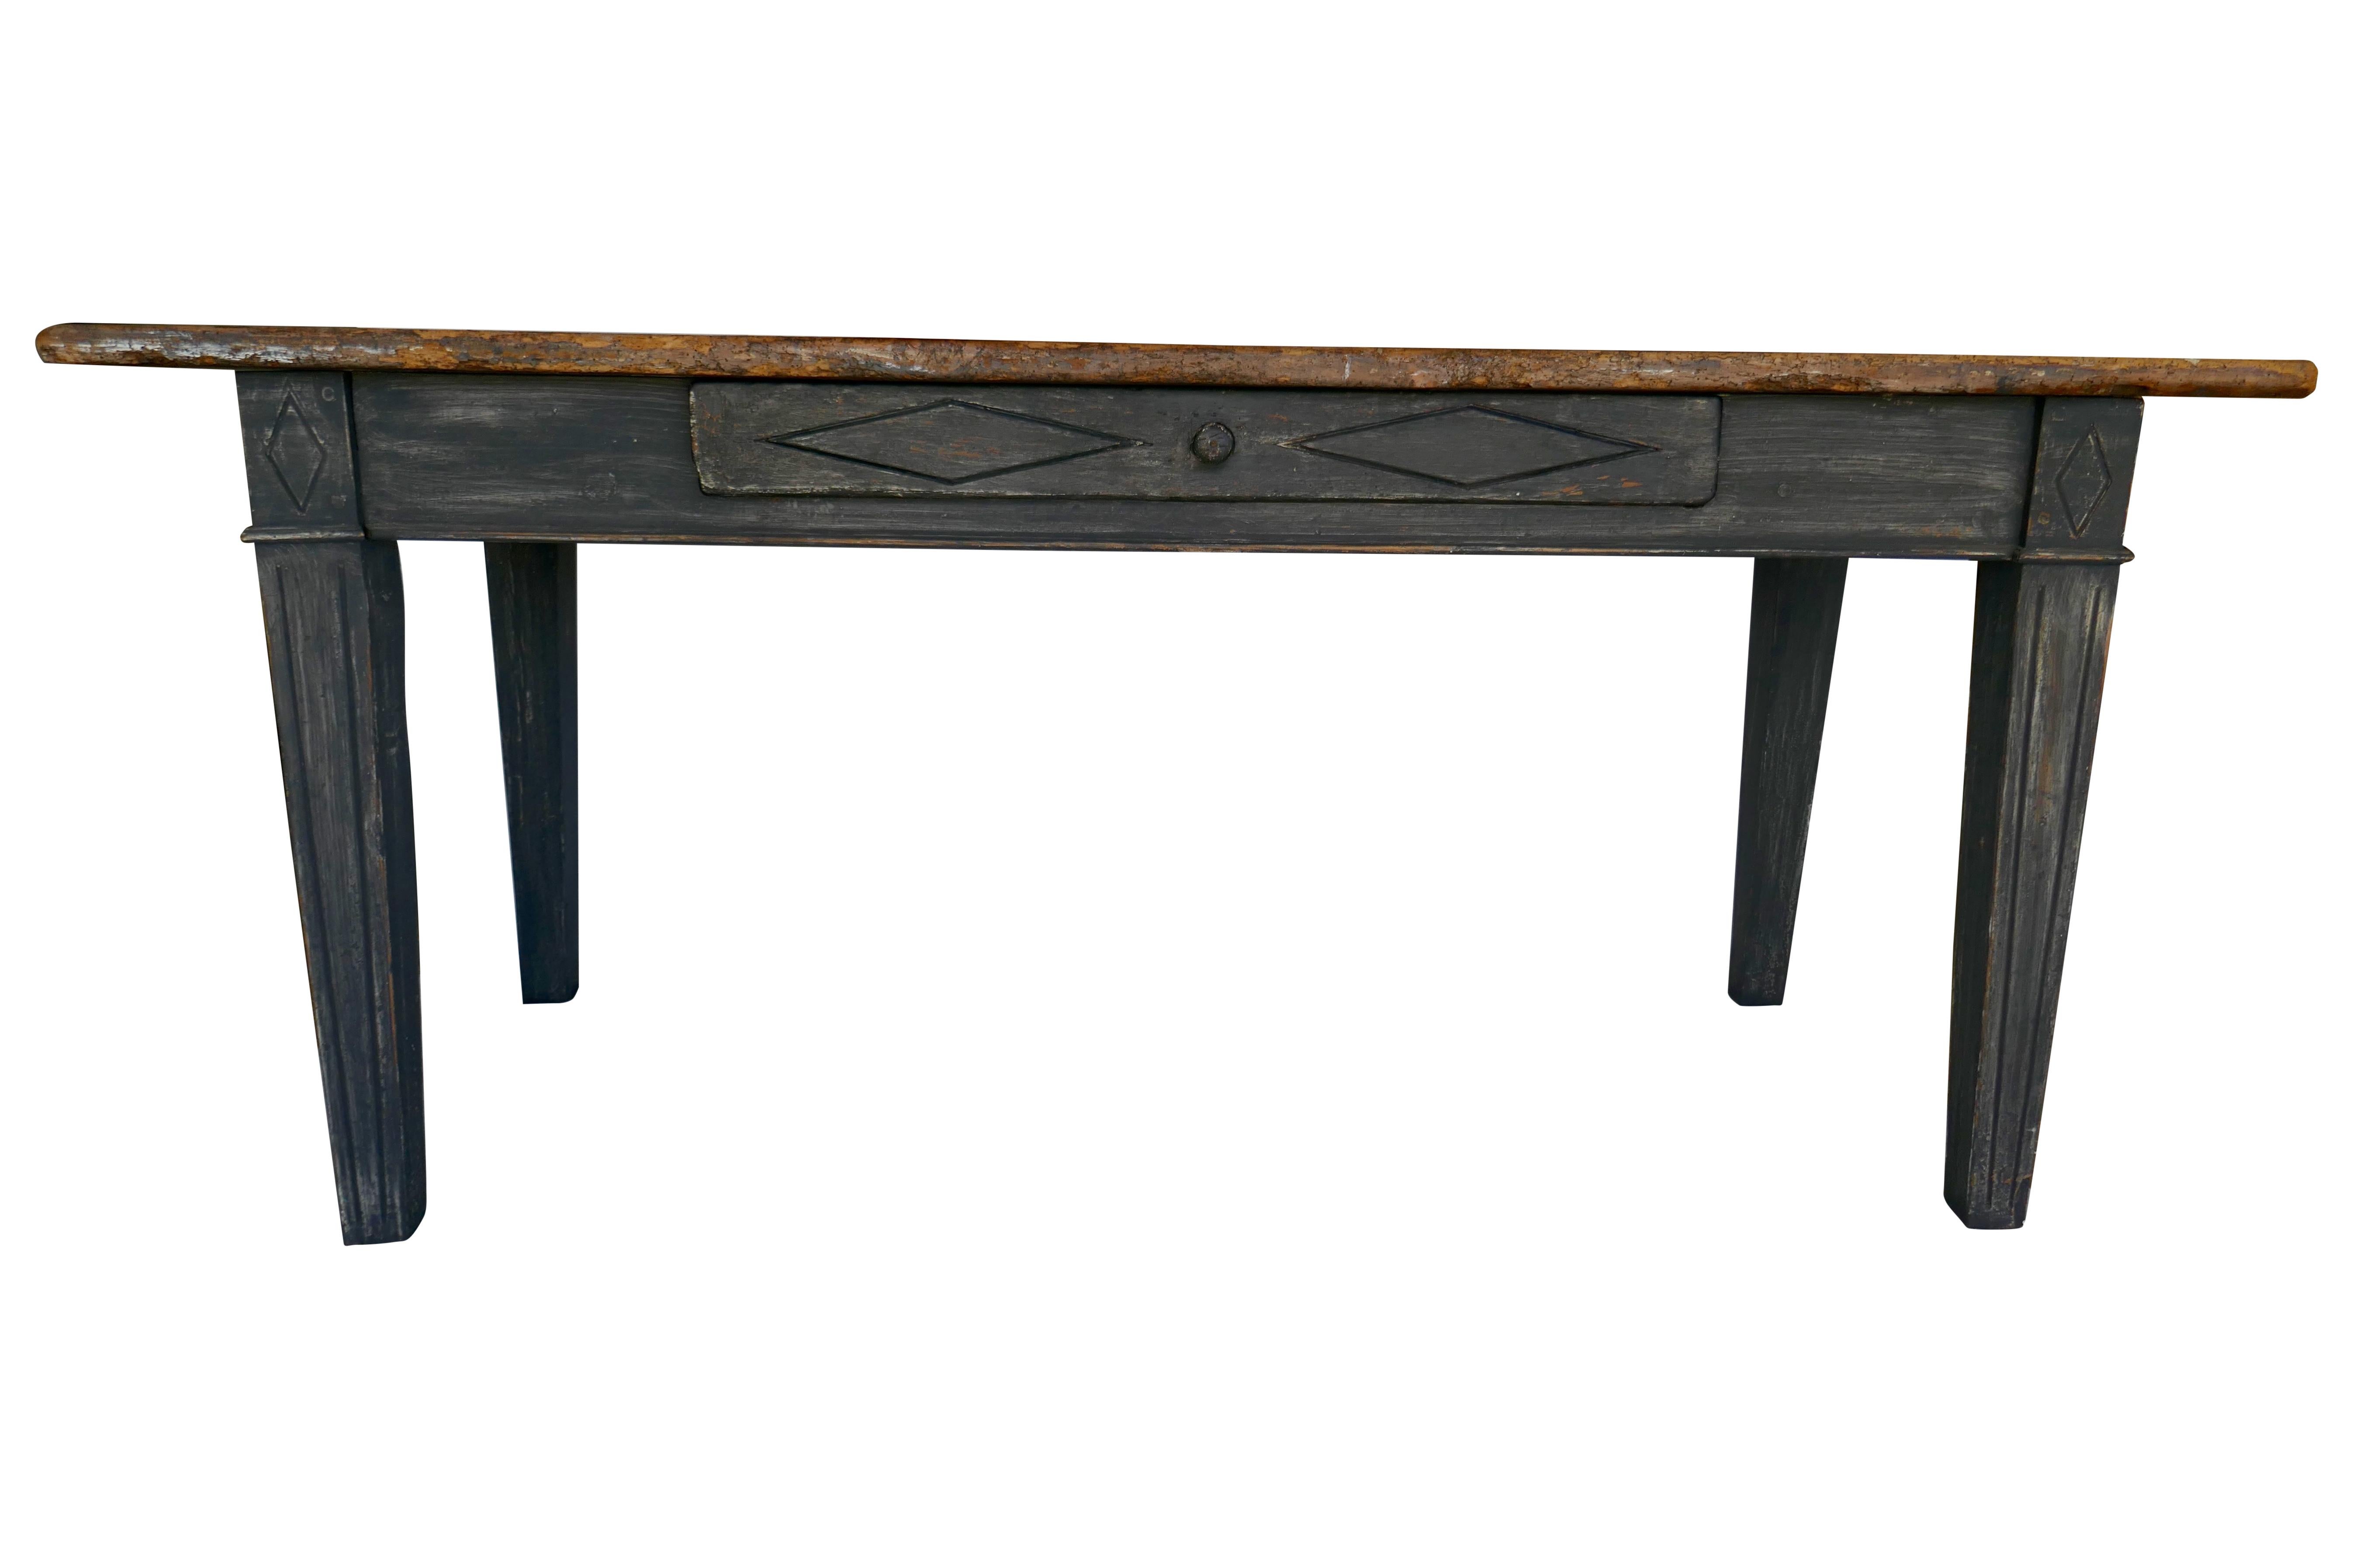 This large antique hand-crafted solid wood desk from Belgium is a stunning piece of furniture that will add a touch of old-world charm to any office or study. Carved and built from solid hardwood, this desk has naturally distressed wood and patina